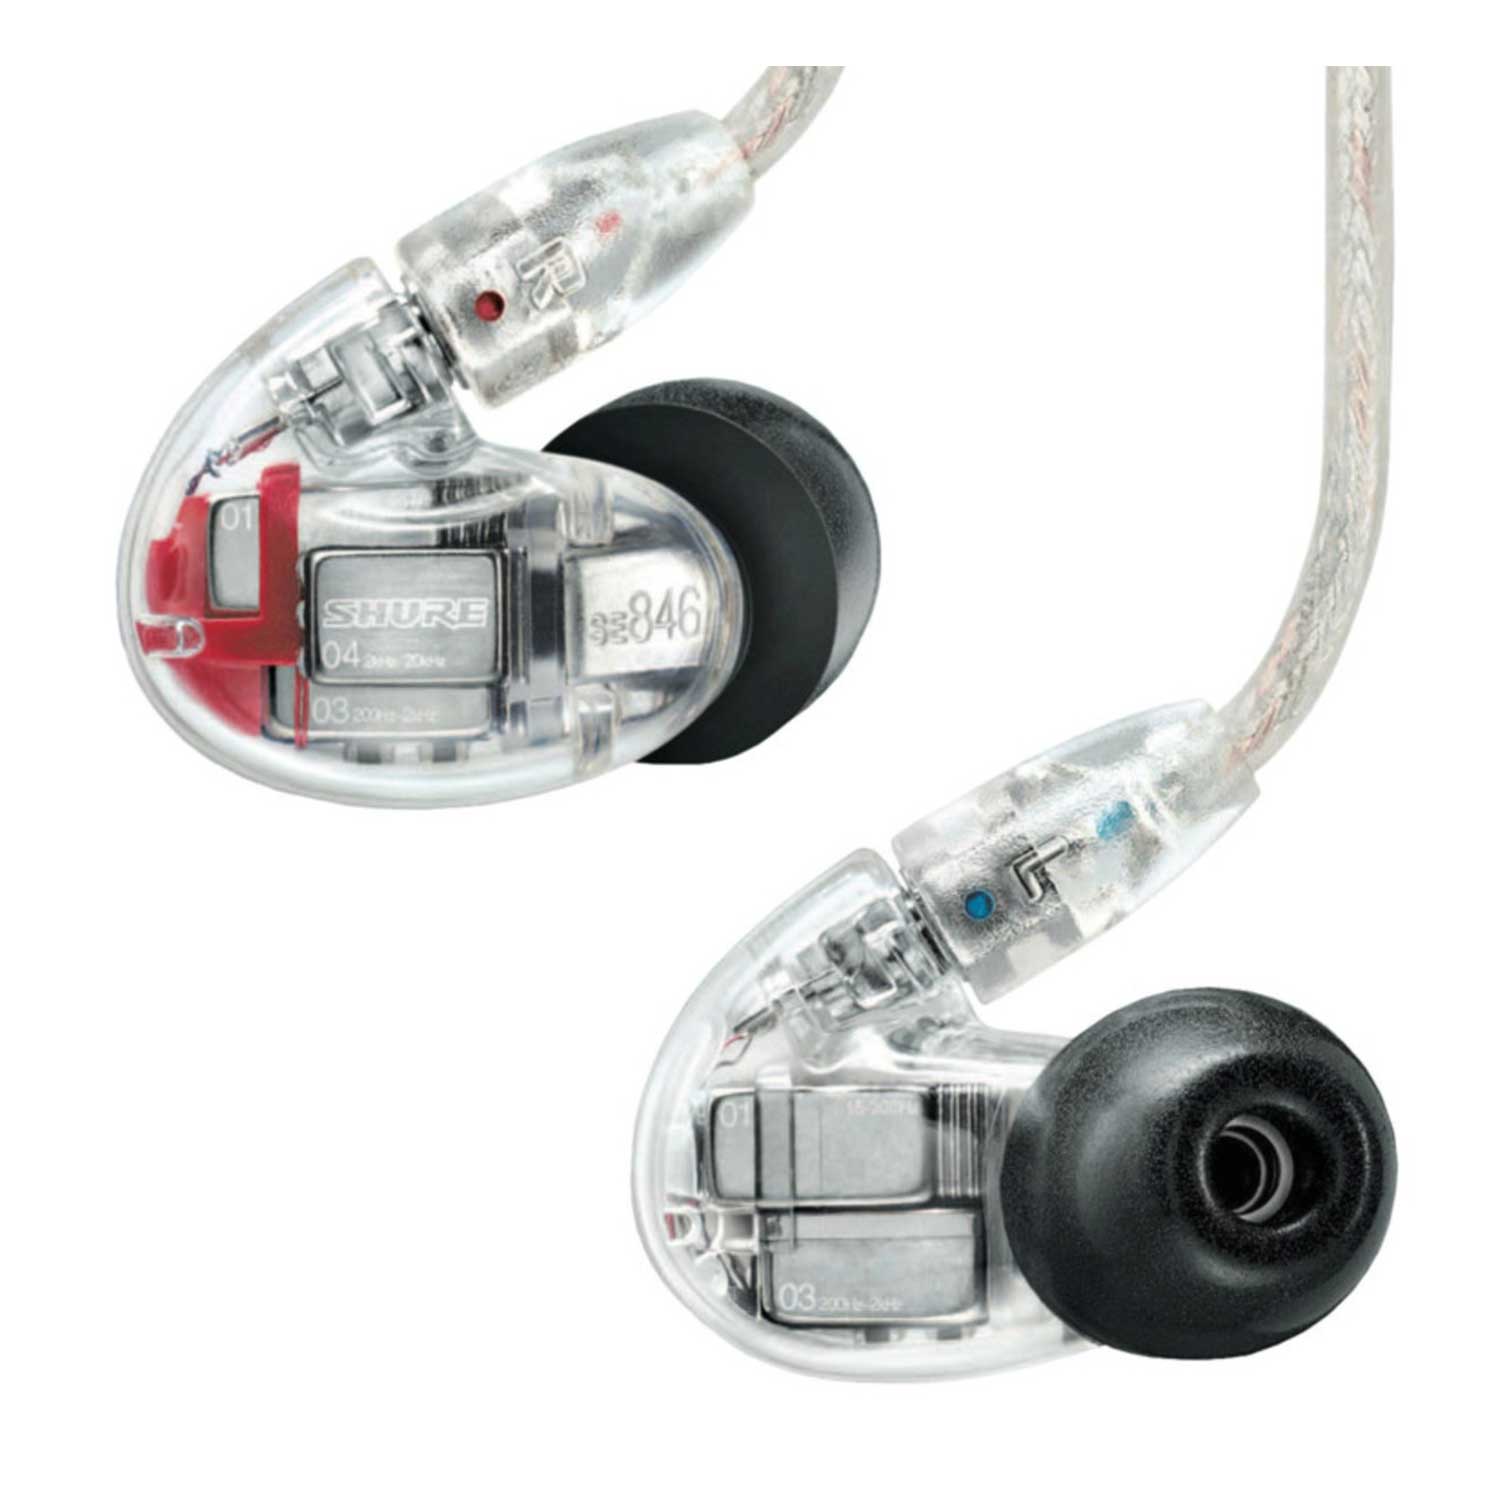 Auriculares In Ear Shure Se215 Cl Intraurales Monitoreo Vivo